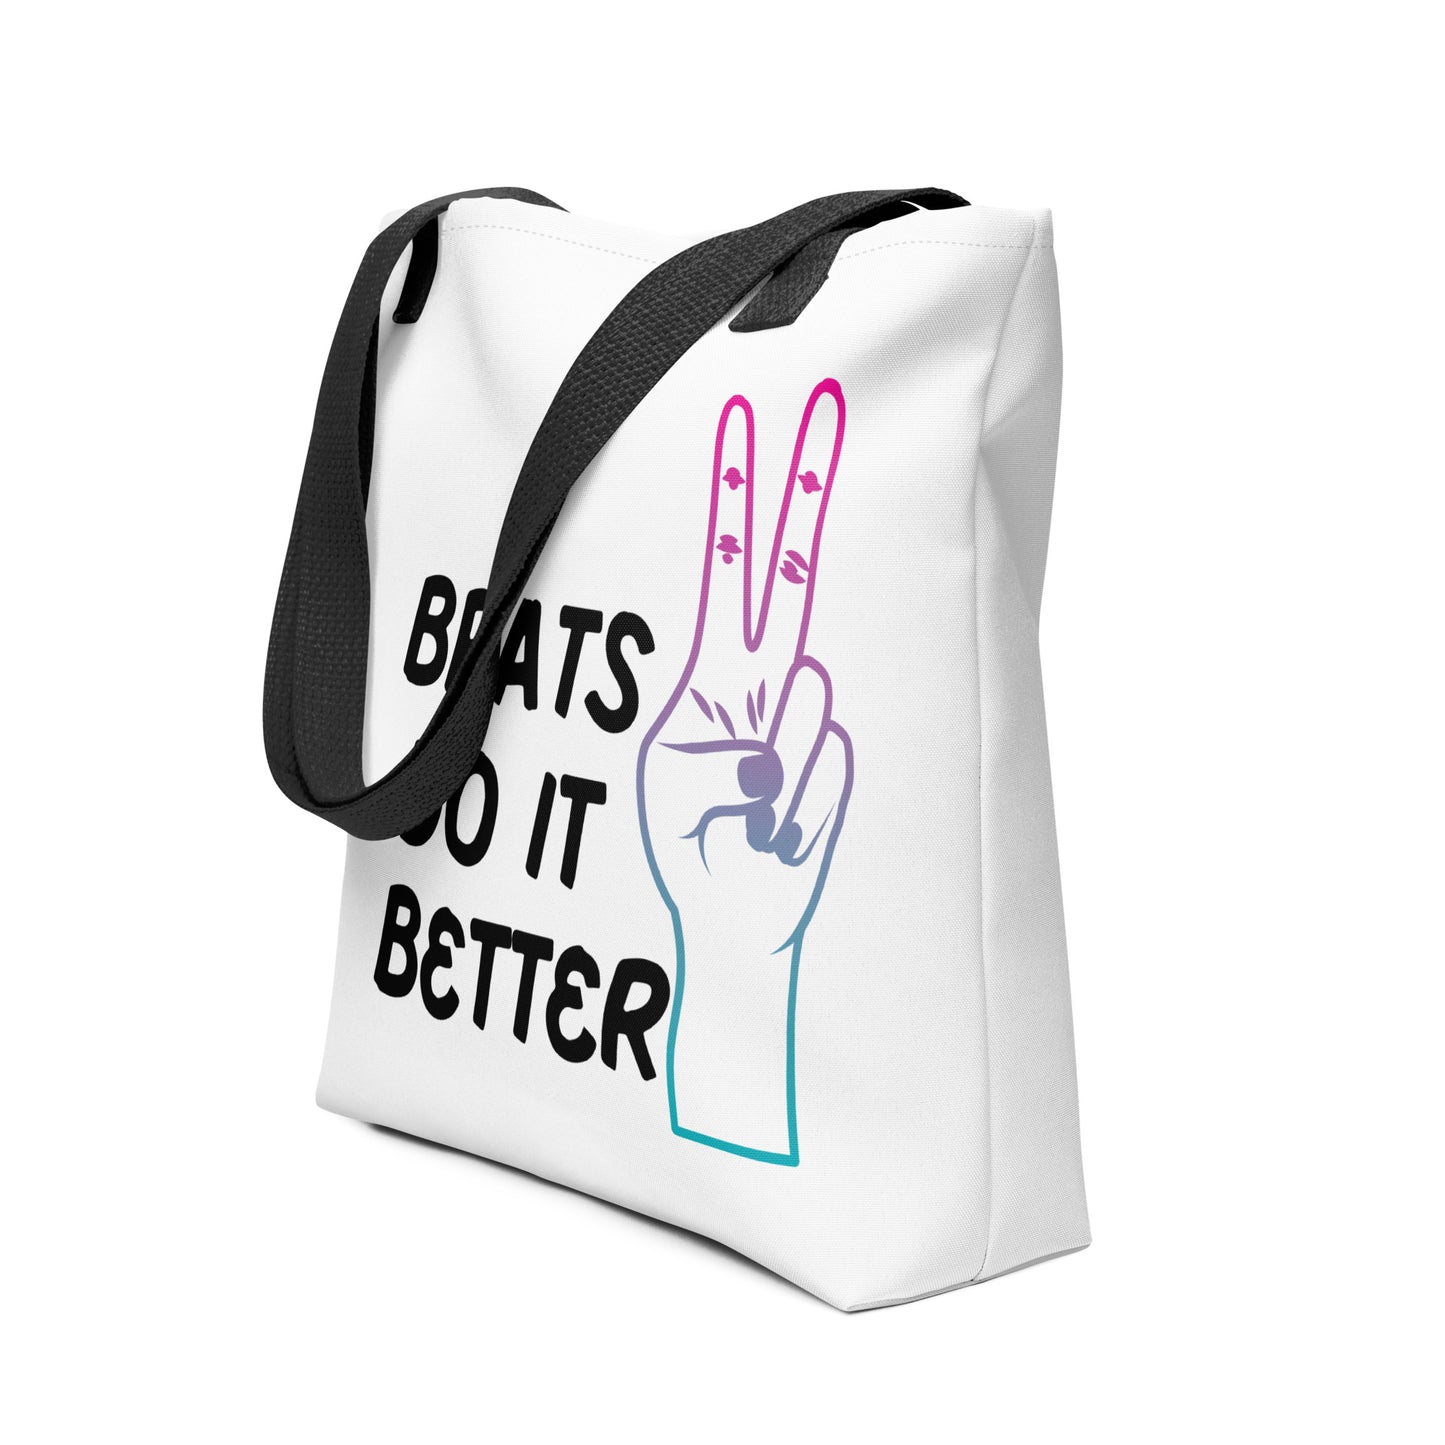 Brats Do It Better Tote